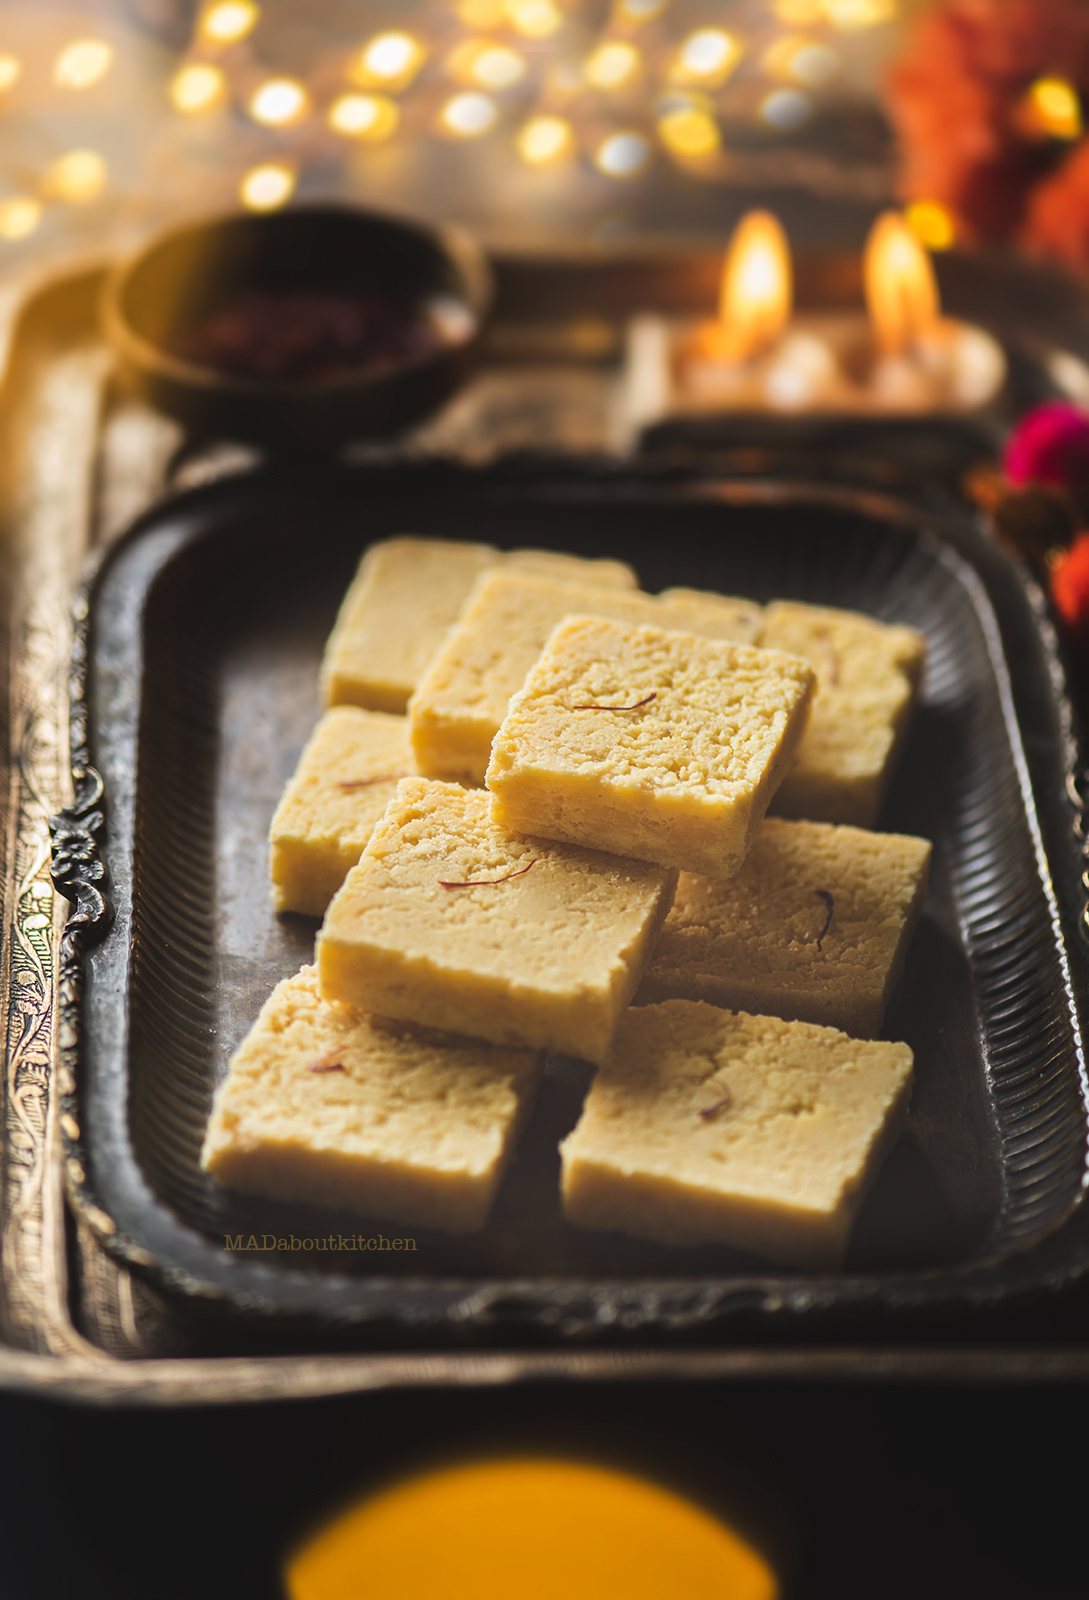 7 cups barfi is made using 7 cups of ingredients using Besan.Besan mithai is a simple, easy mithai to make for any festival.